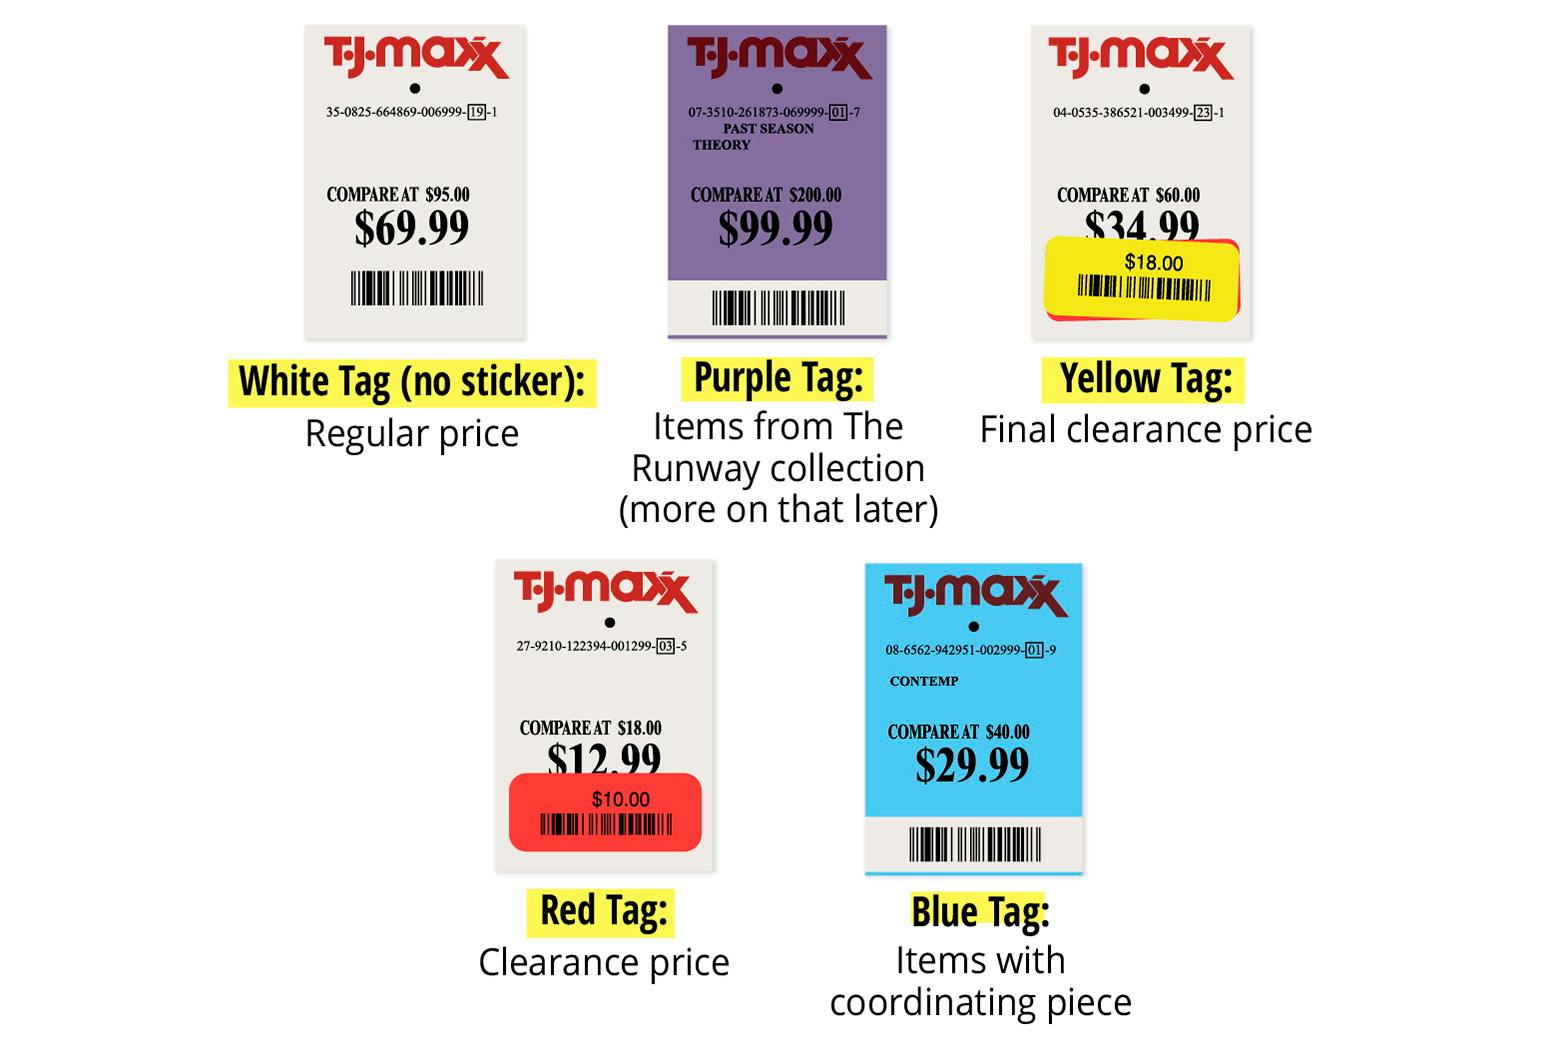 A photo showing the 5 different kinds of TJ Maxx price tags and what they look like.